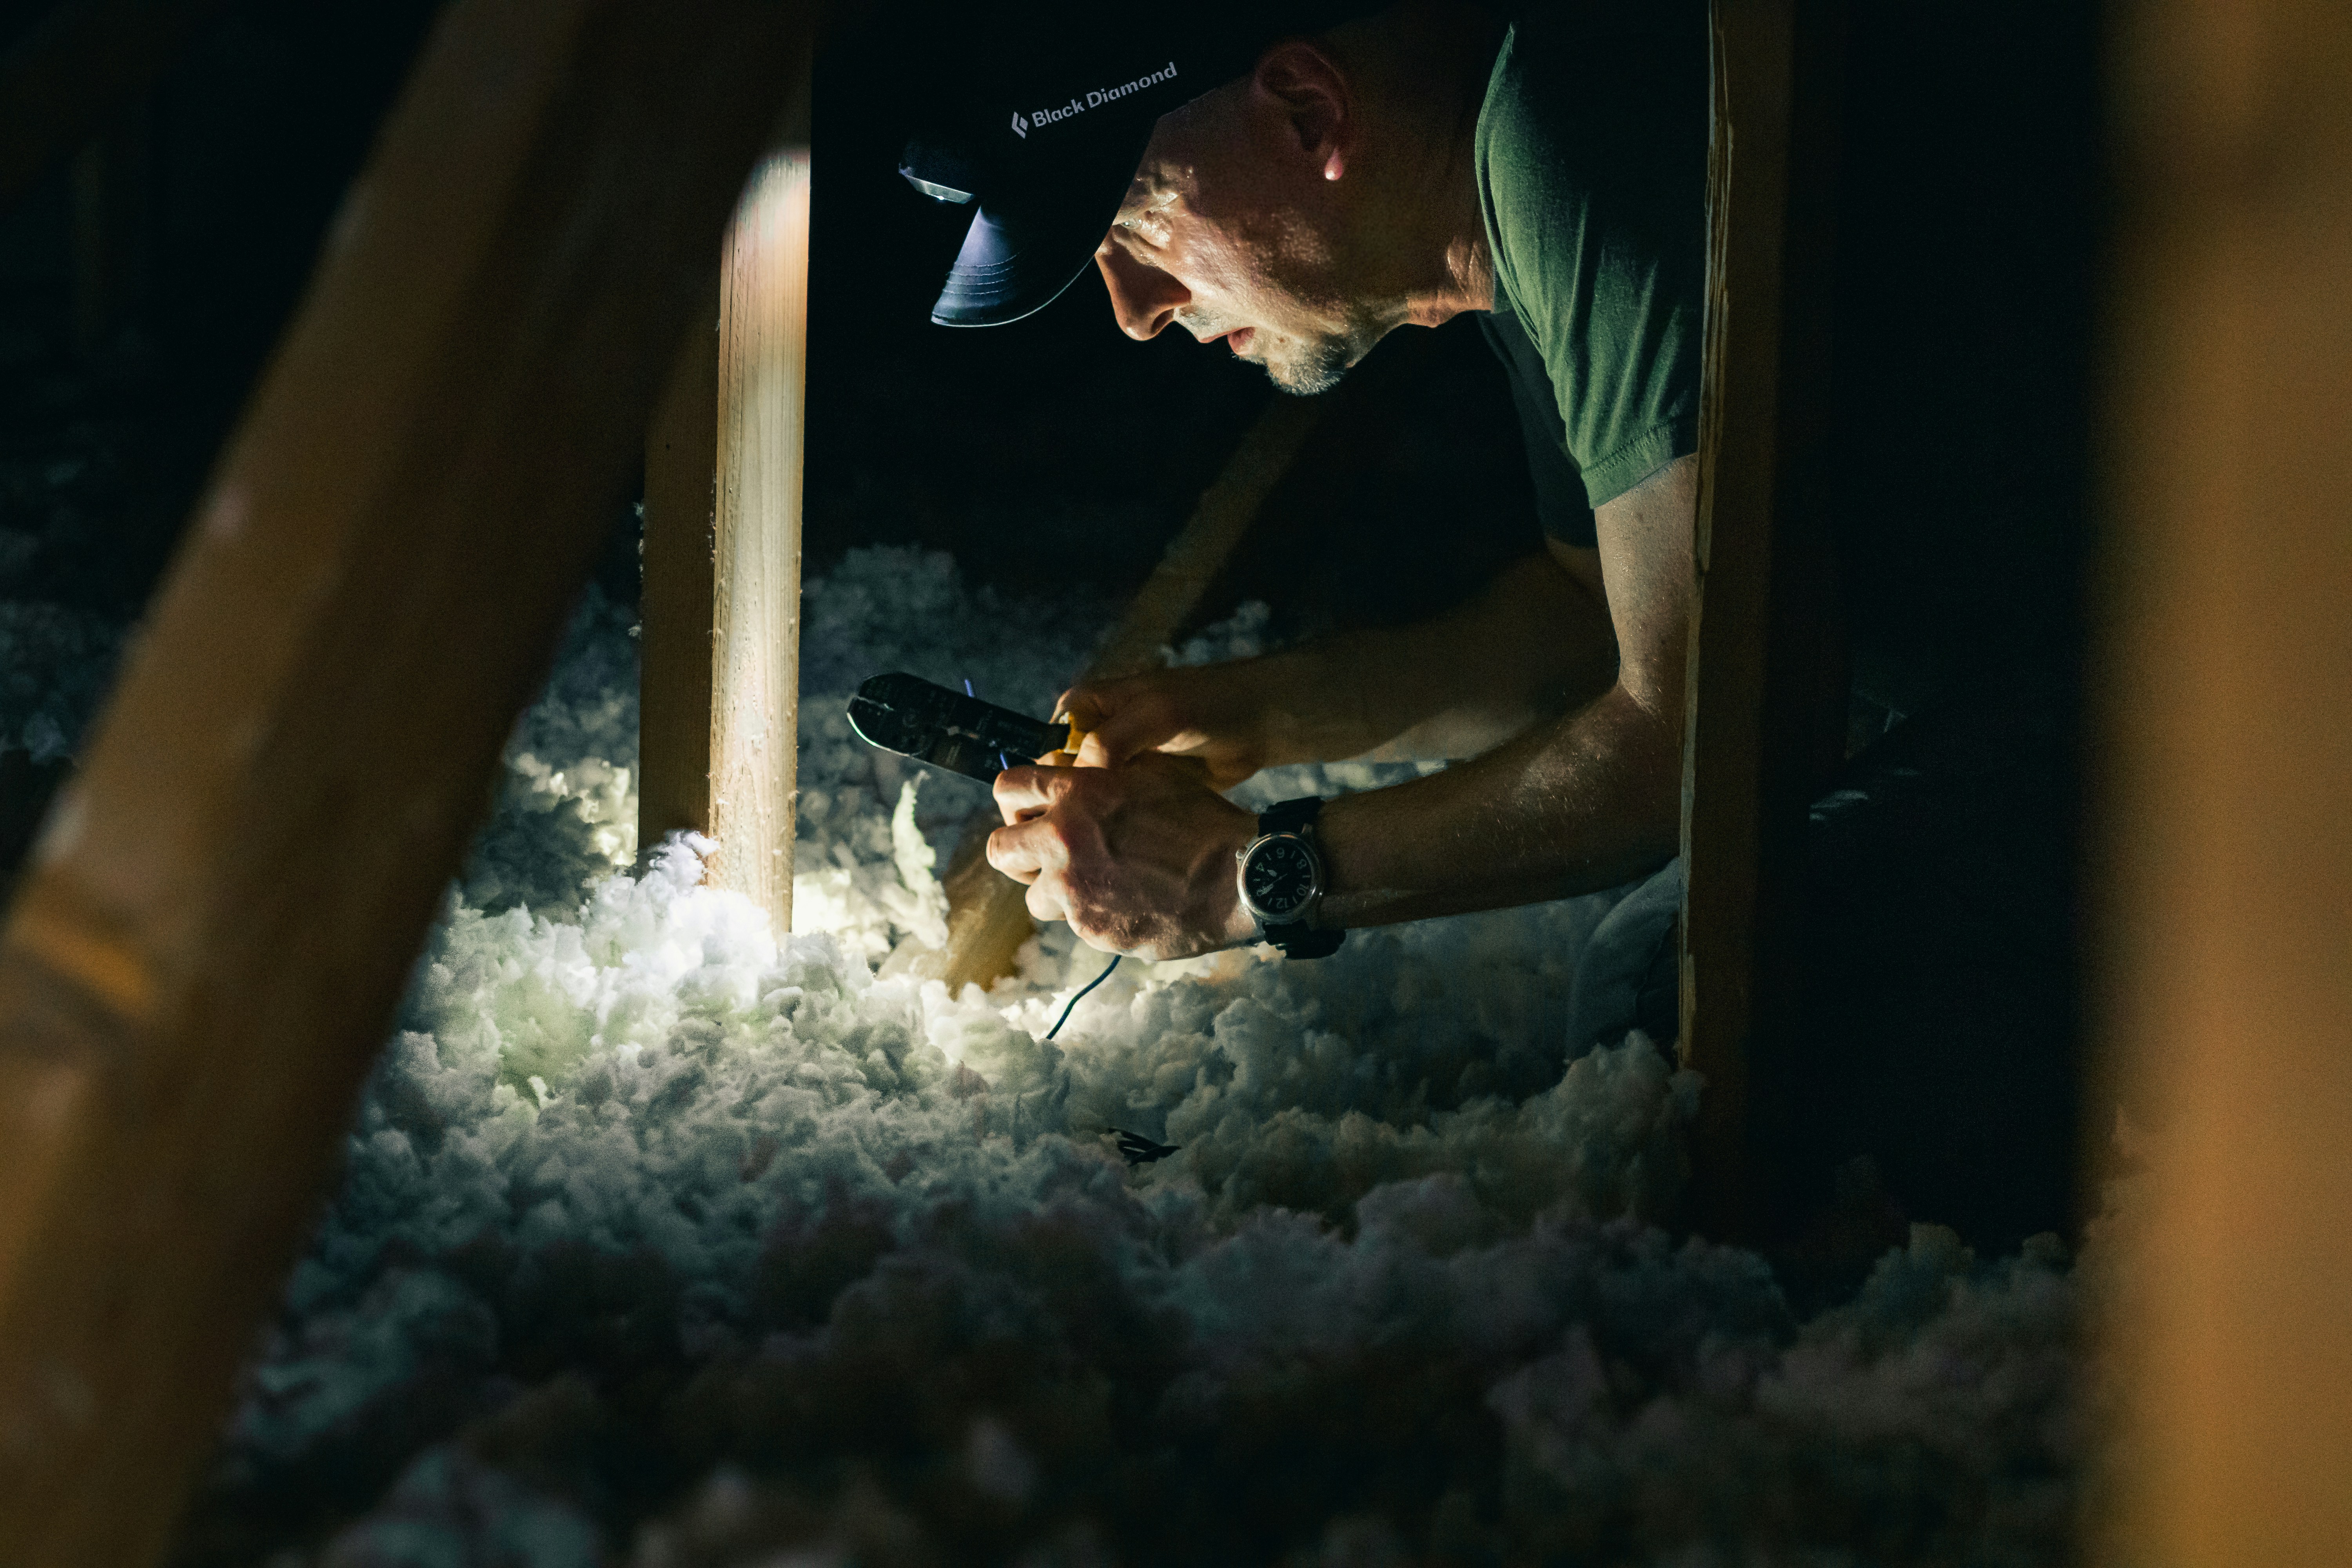 man working in dark attic of house with headlamp for light source</p>
<p>” style=”max-width:440px;float:right;padding:10px 0px 10px 10px;border:0px;”></a>This is a ridiculous question and  <a href=